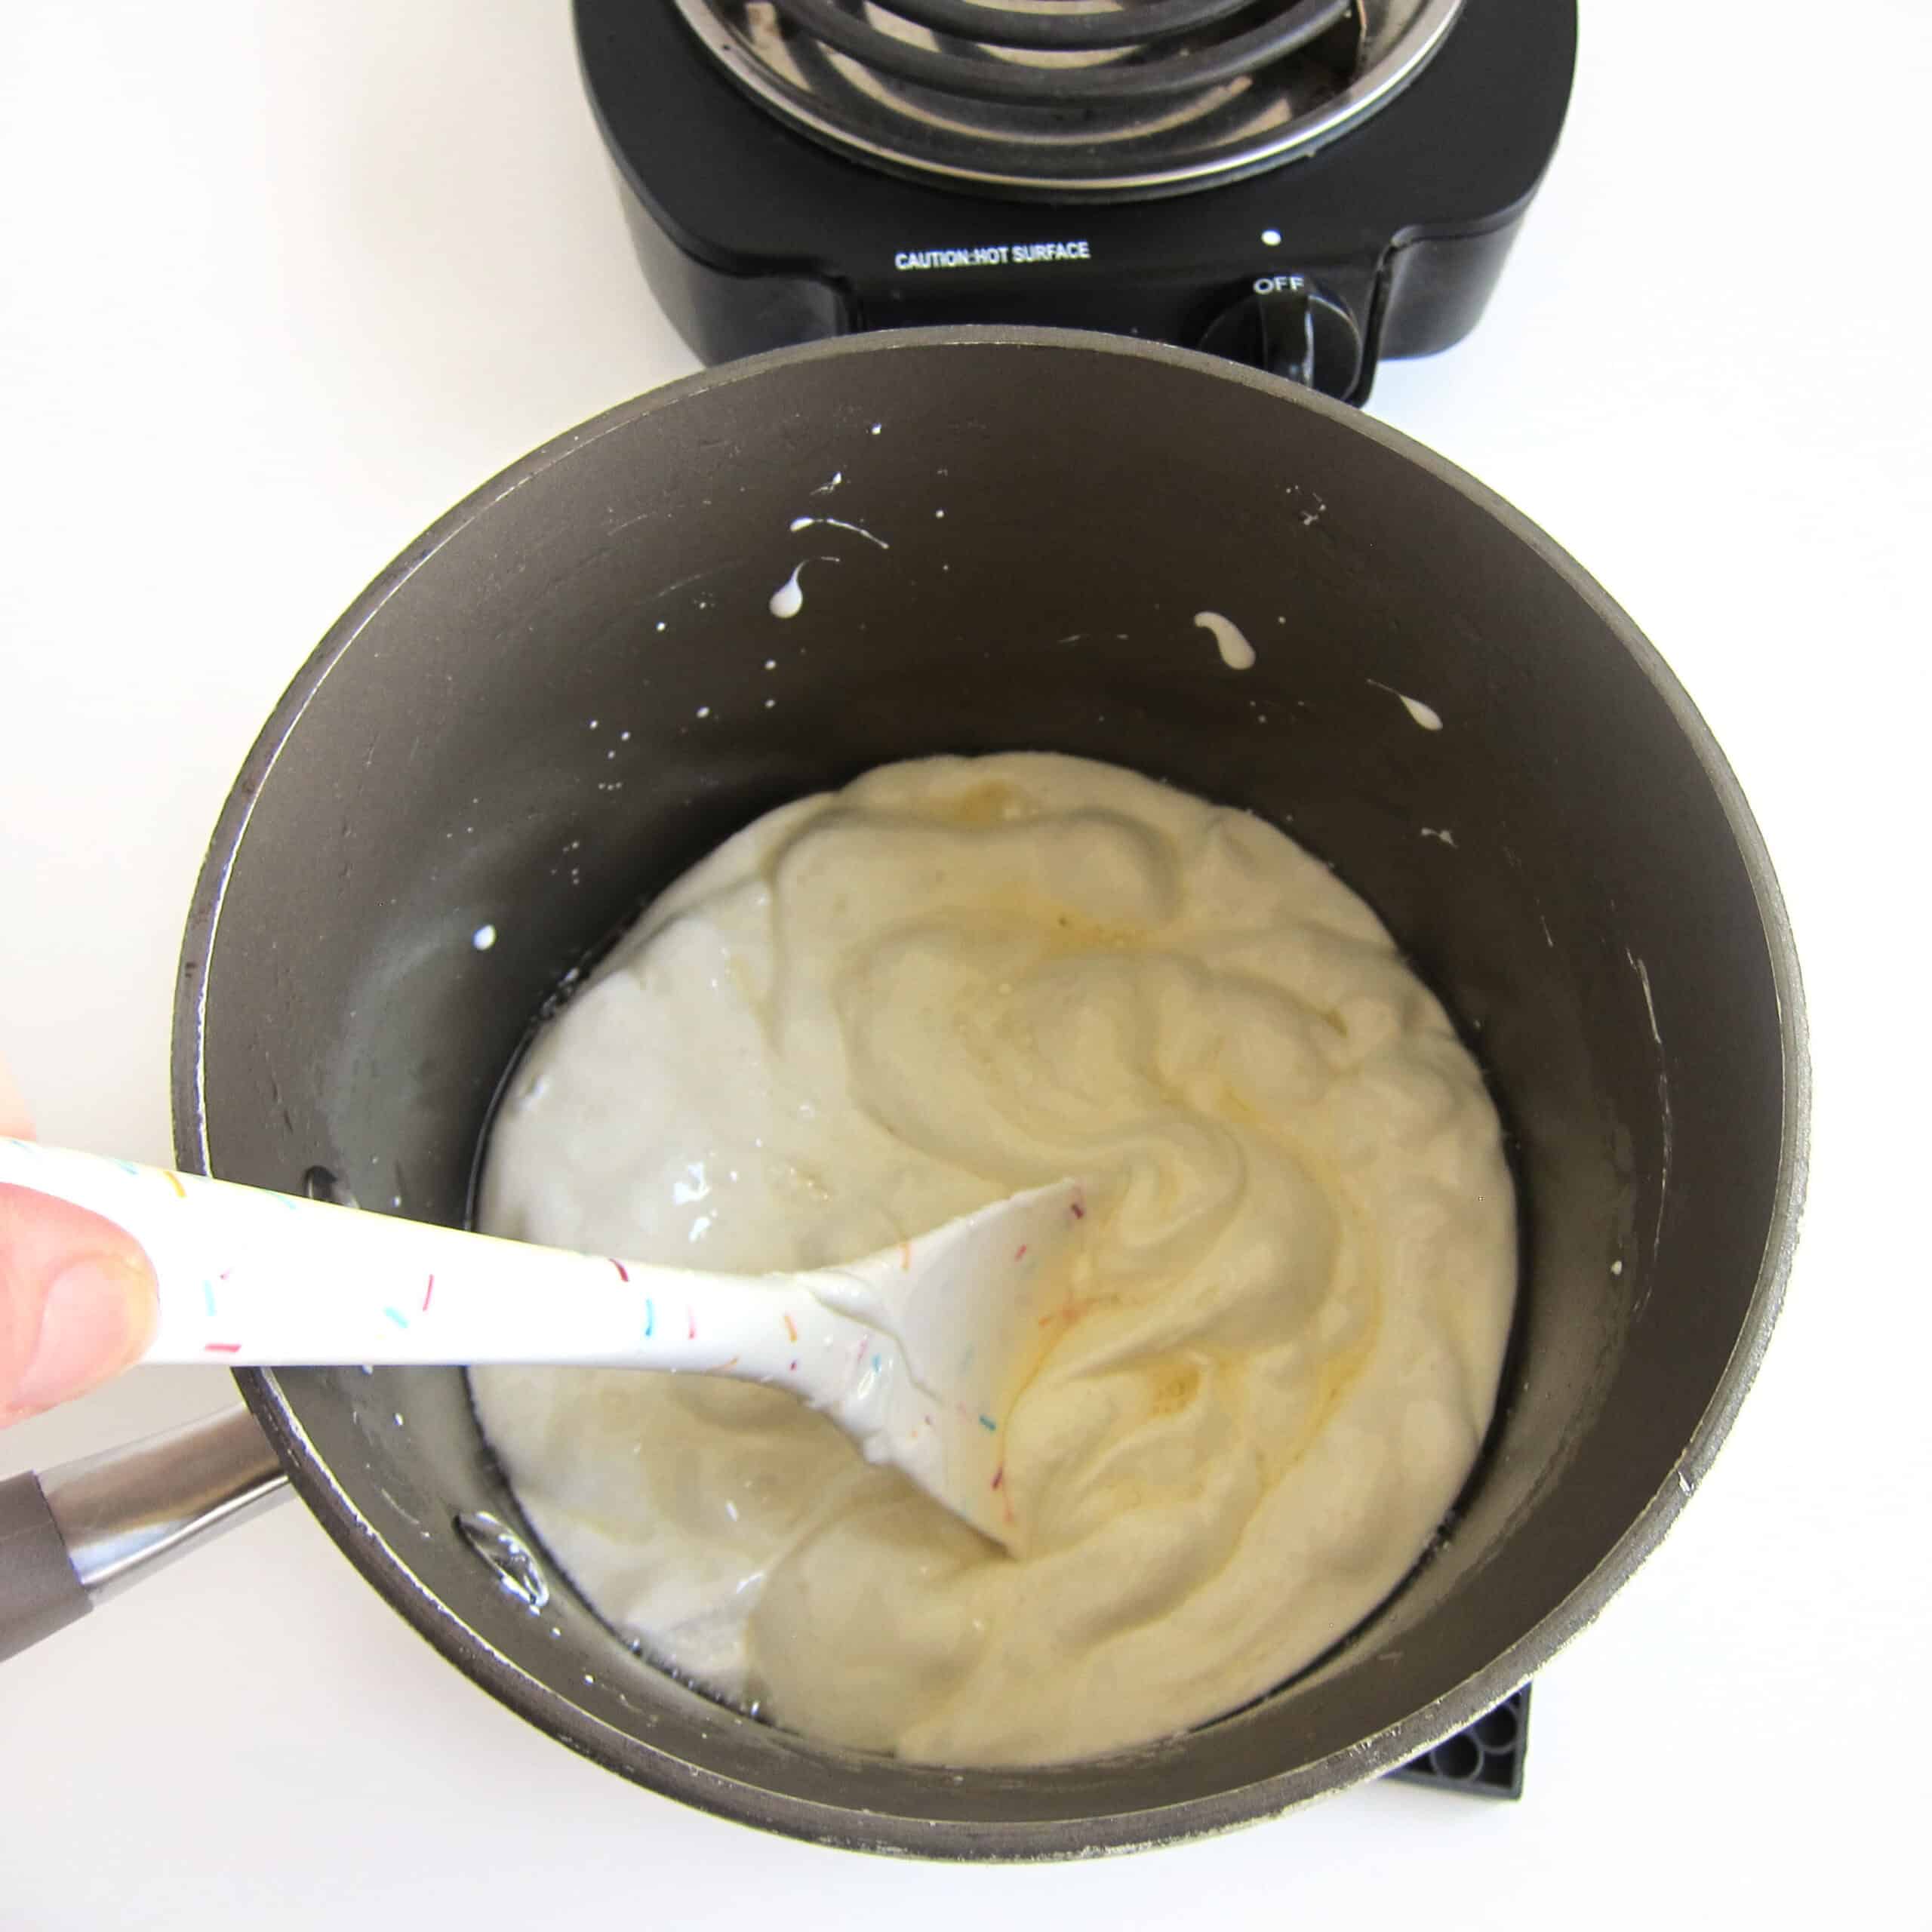 Stirring melted coconut oil and marshmallows in a saucepan using a silicone spatula.